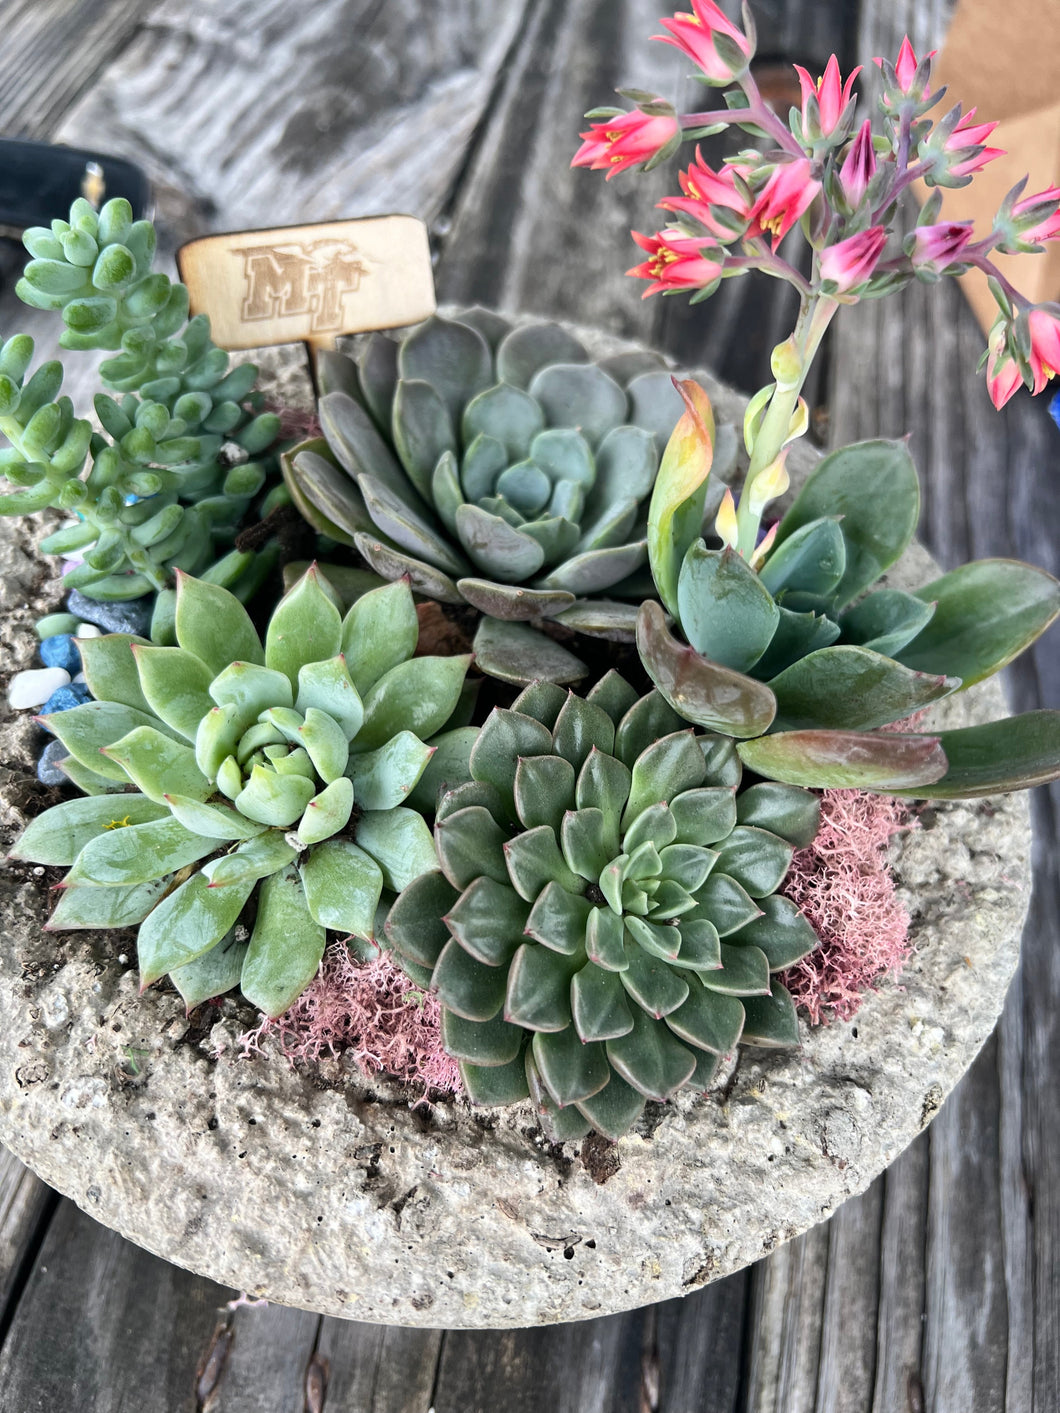 POP-UP SUCCULENT BAR - Bowling Green, KY. SUNDAY, MARCH 24 AT 2PM